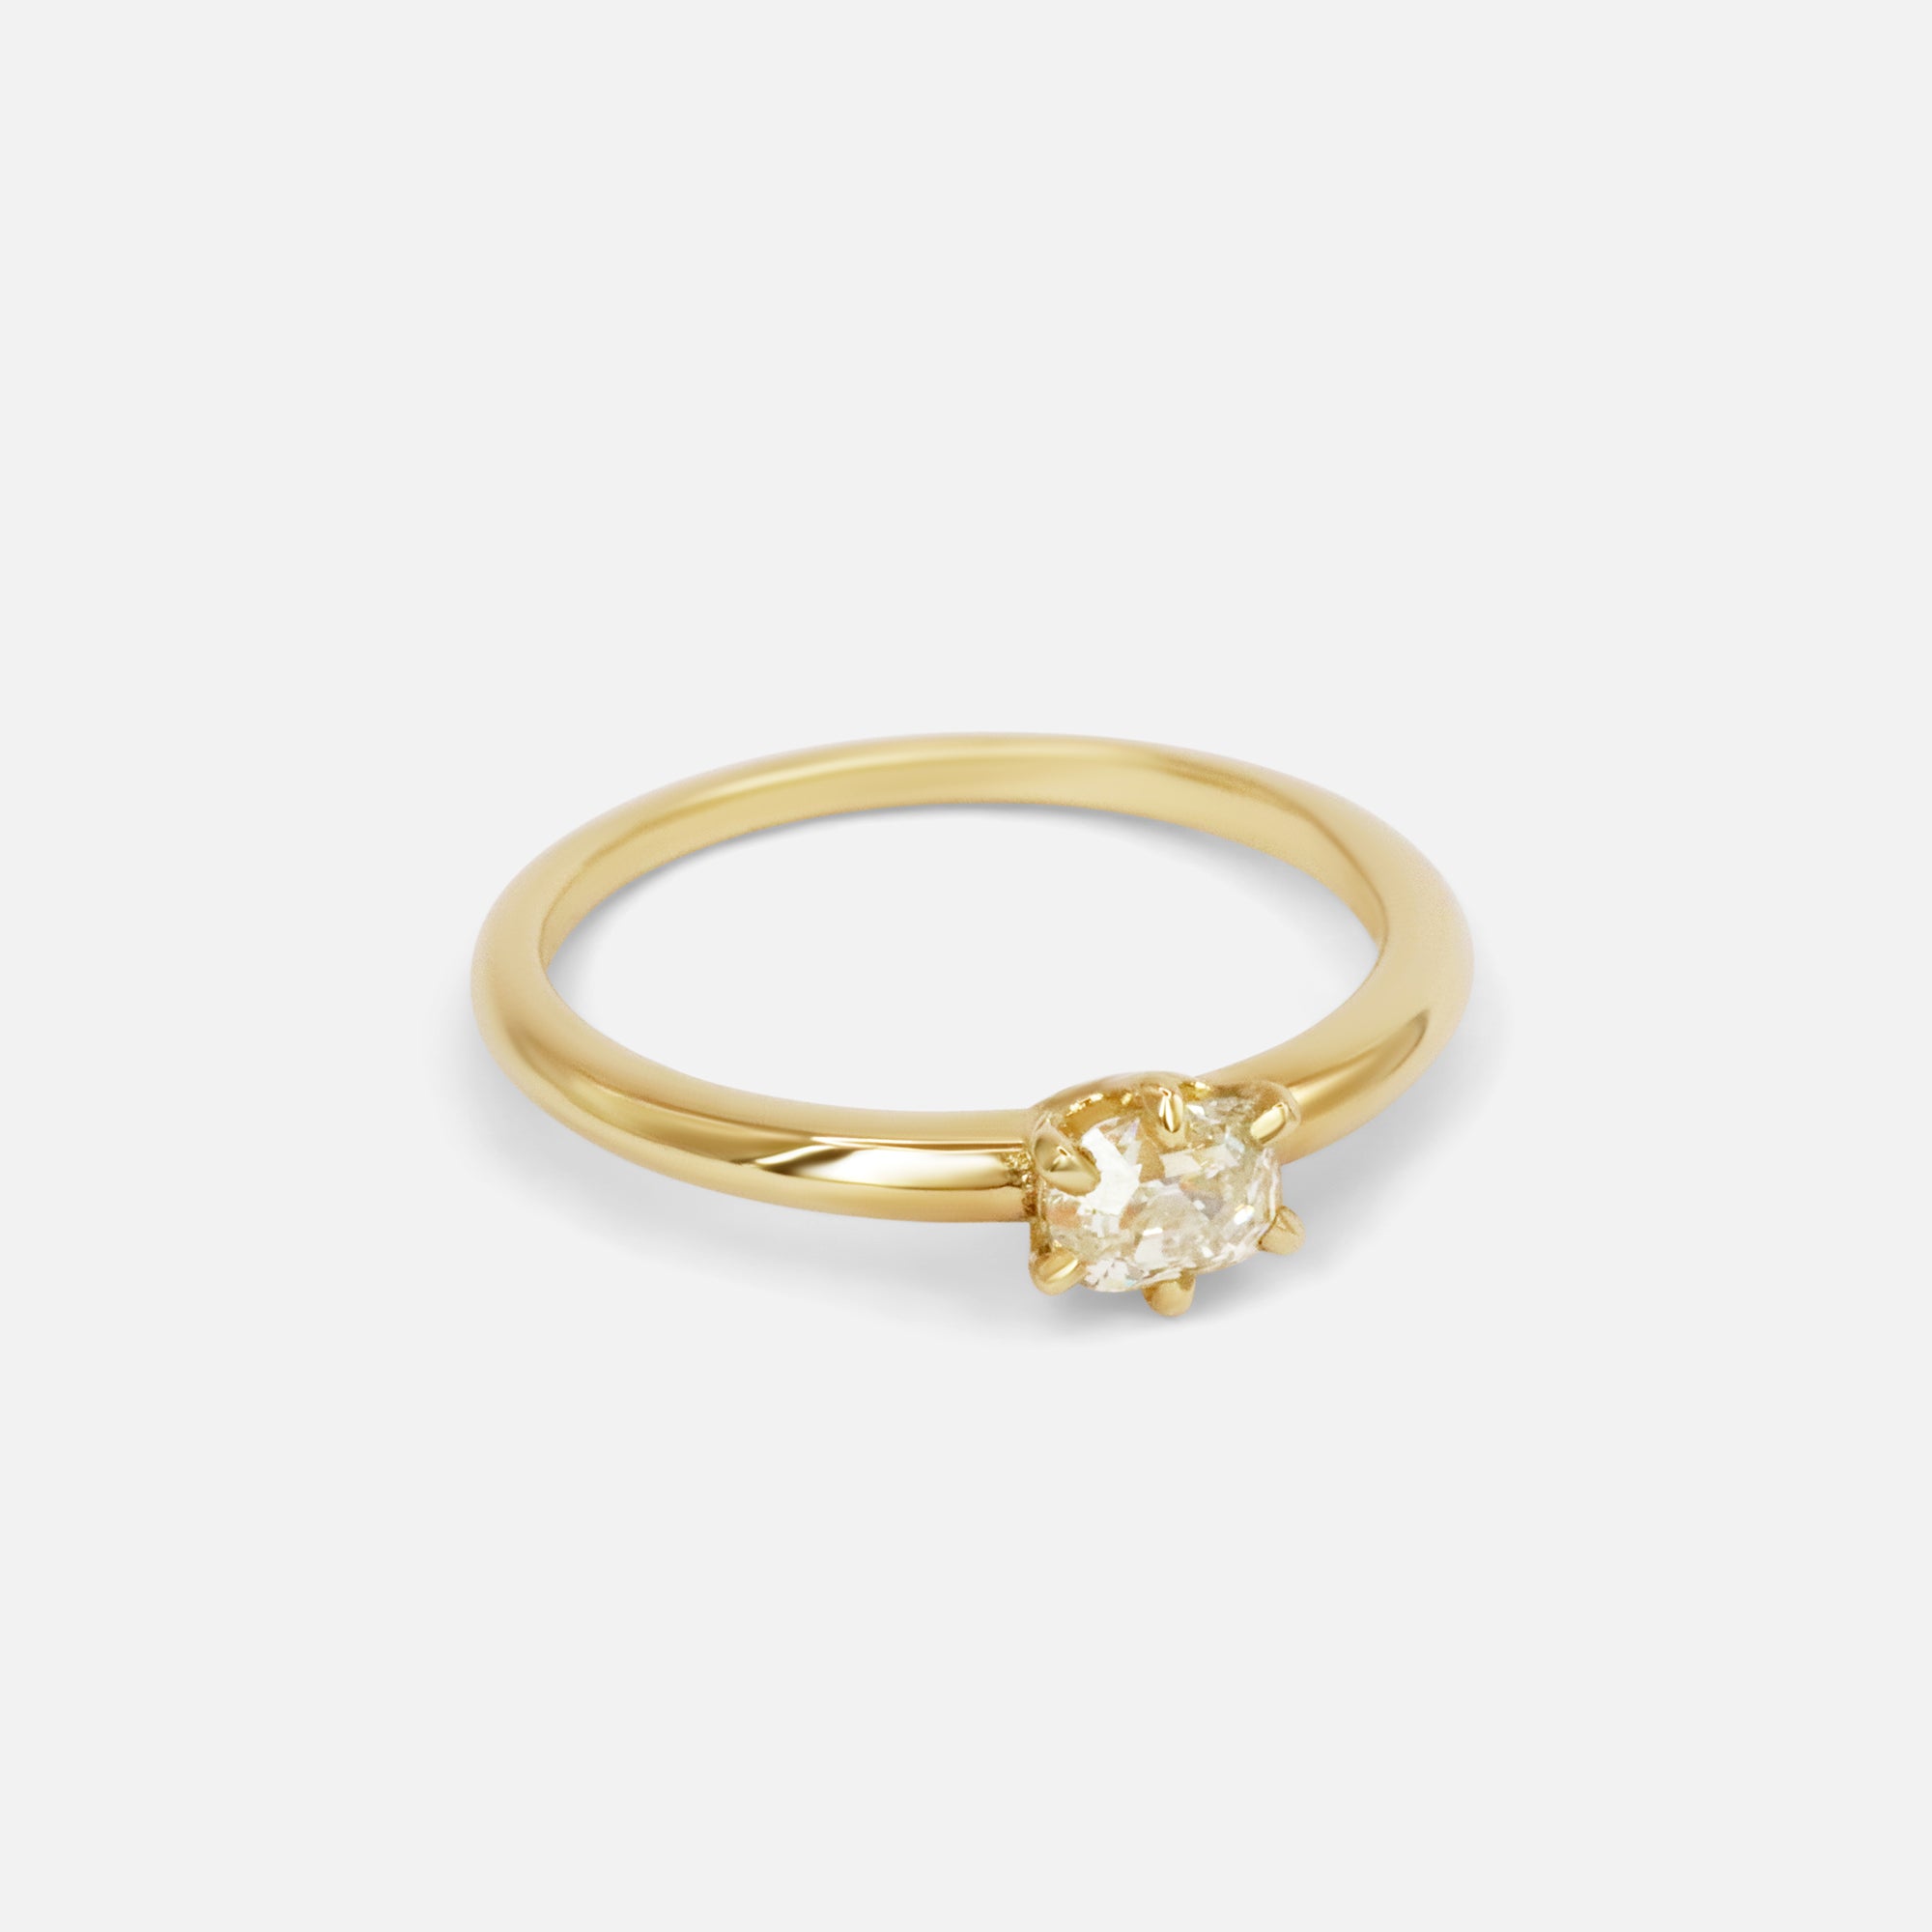 Sol Diamond Ring By Nishi in Engagement Rings Category